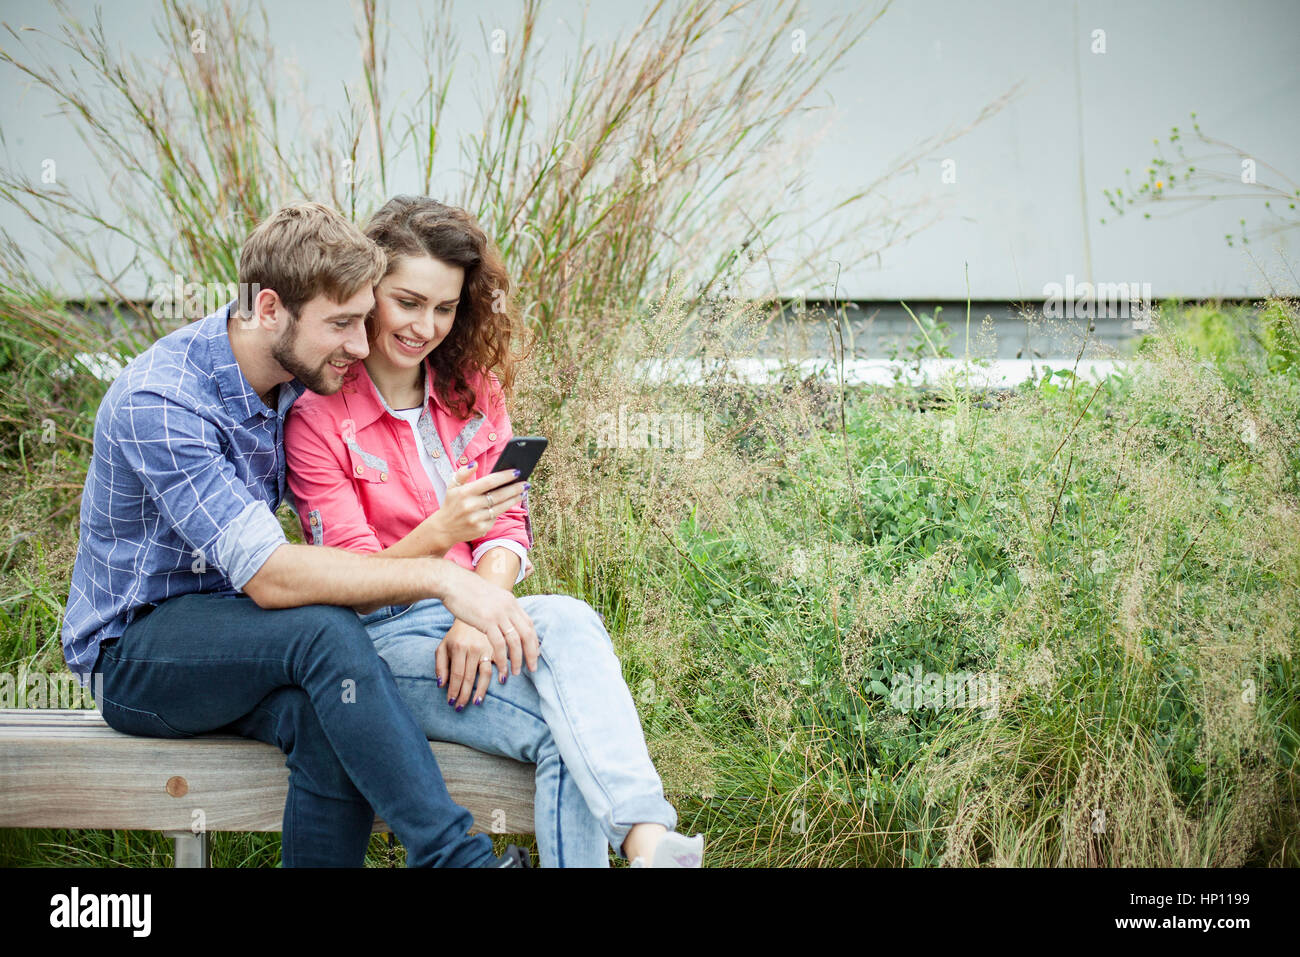 Couple sitting together on park bench, looking at smartphone Stock Photo